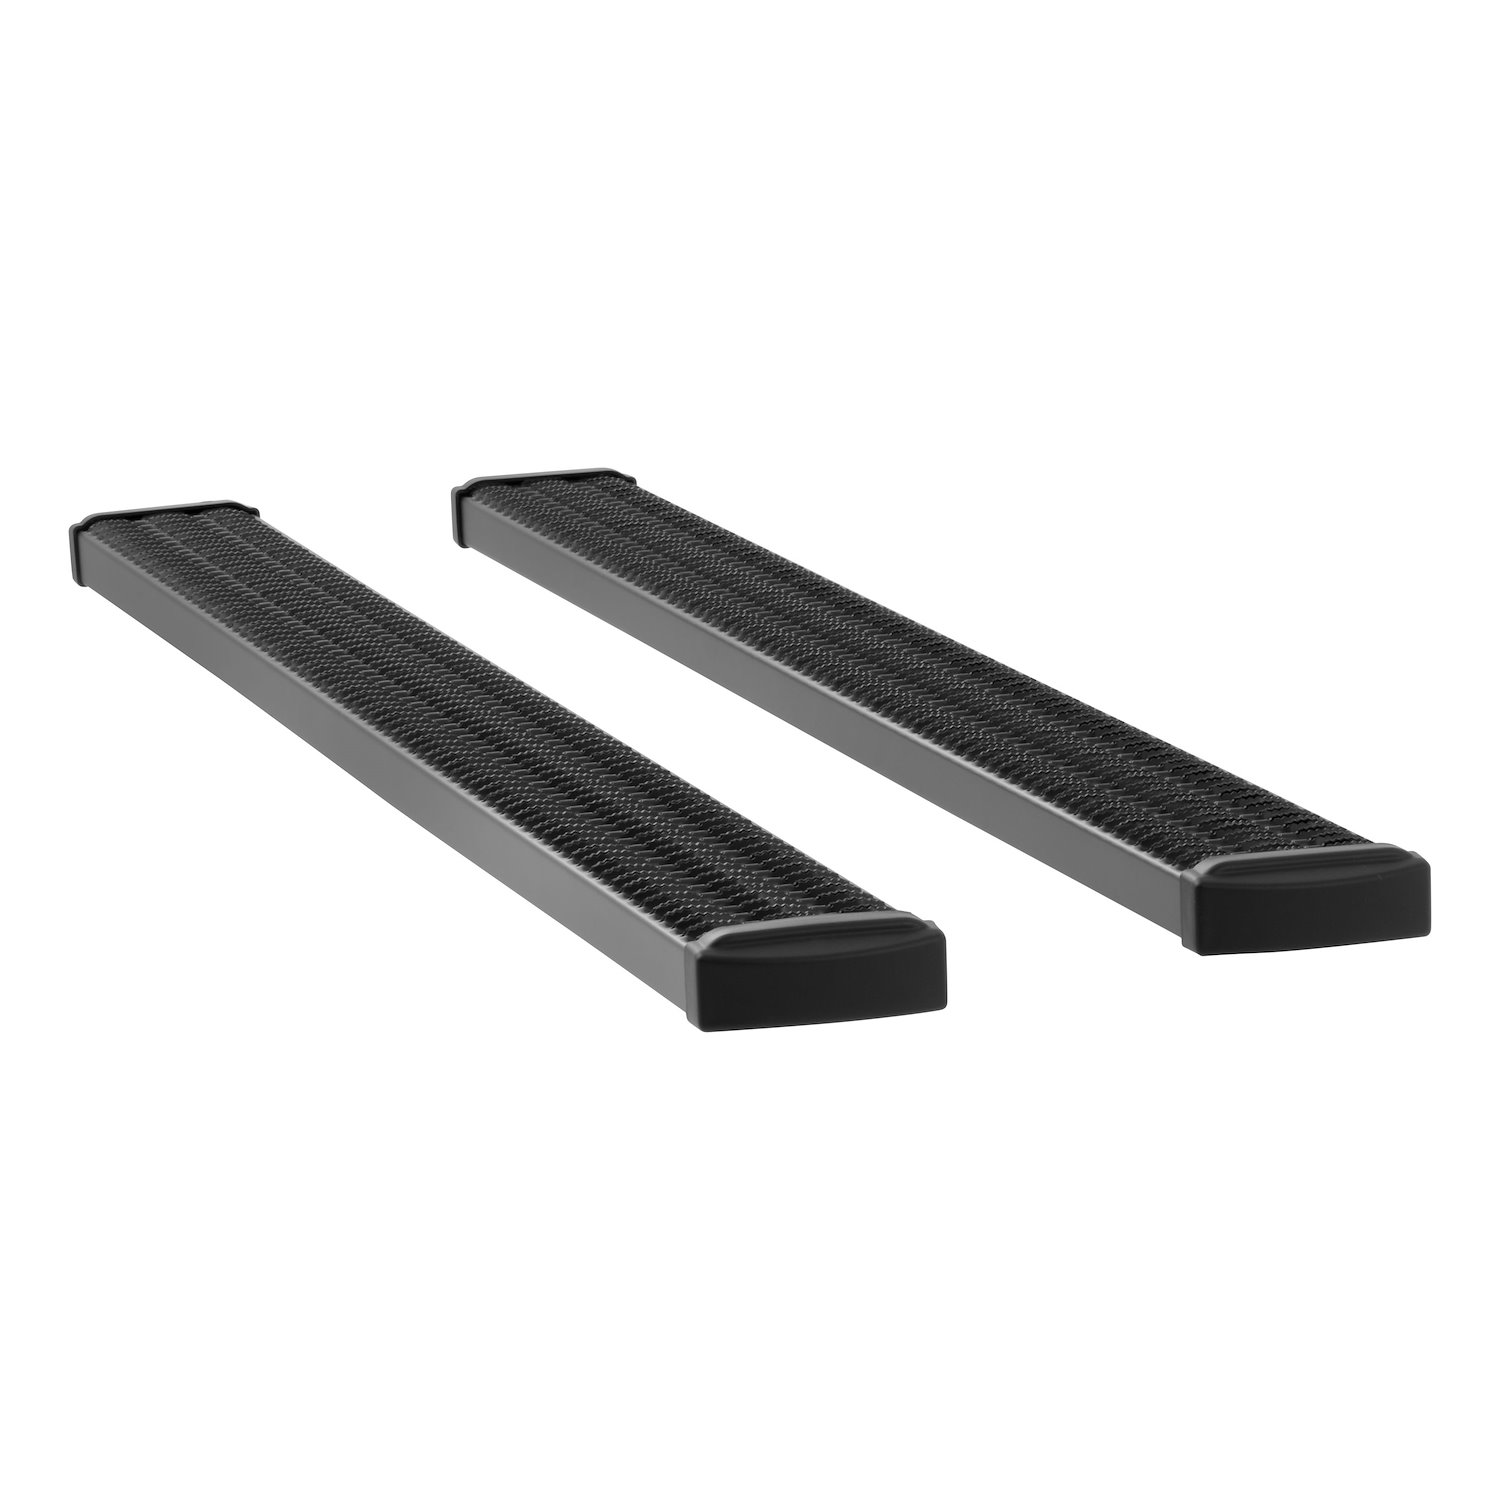 415088-401723 Grip Step 7 in. x 88 in. Black Aluminum Running Boards Fits Select Ford Super Duty